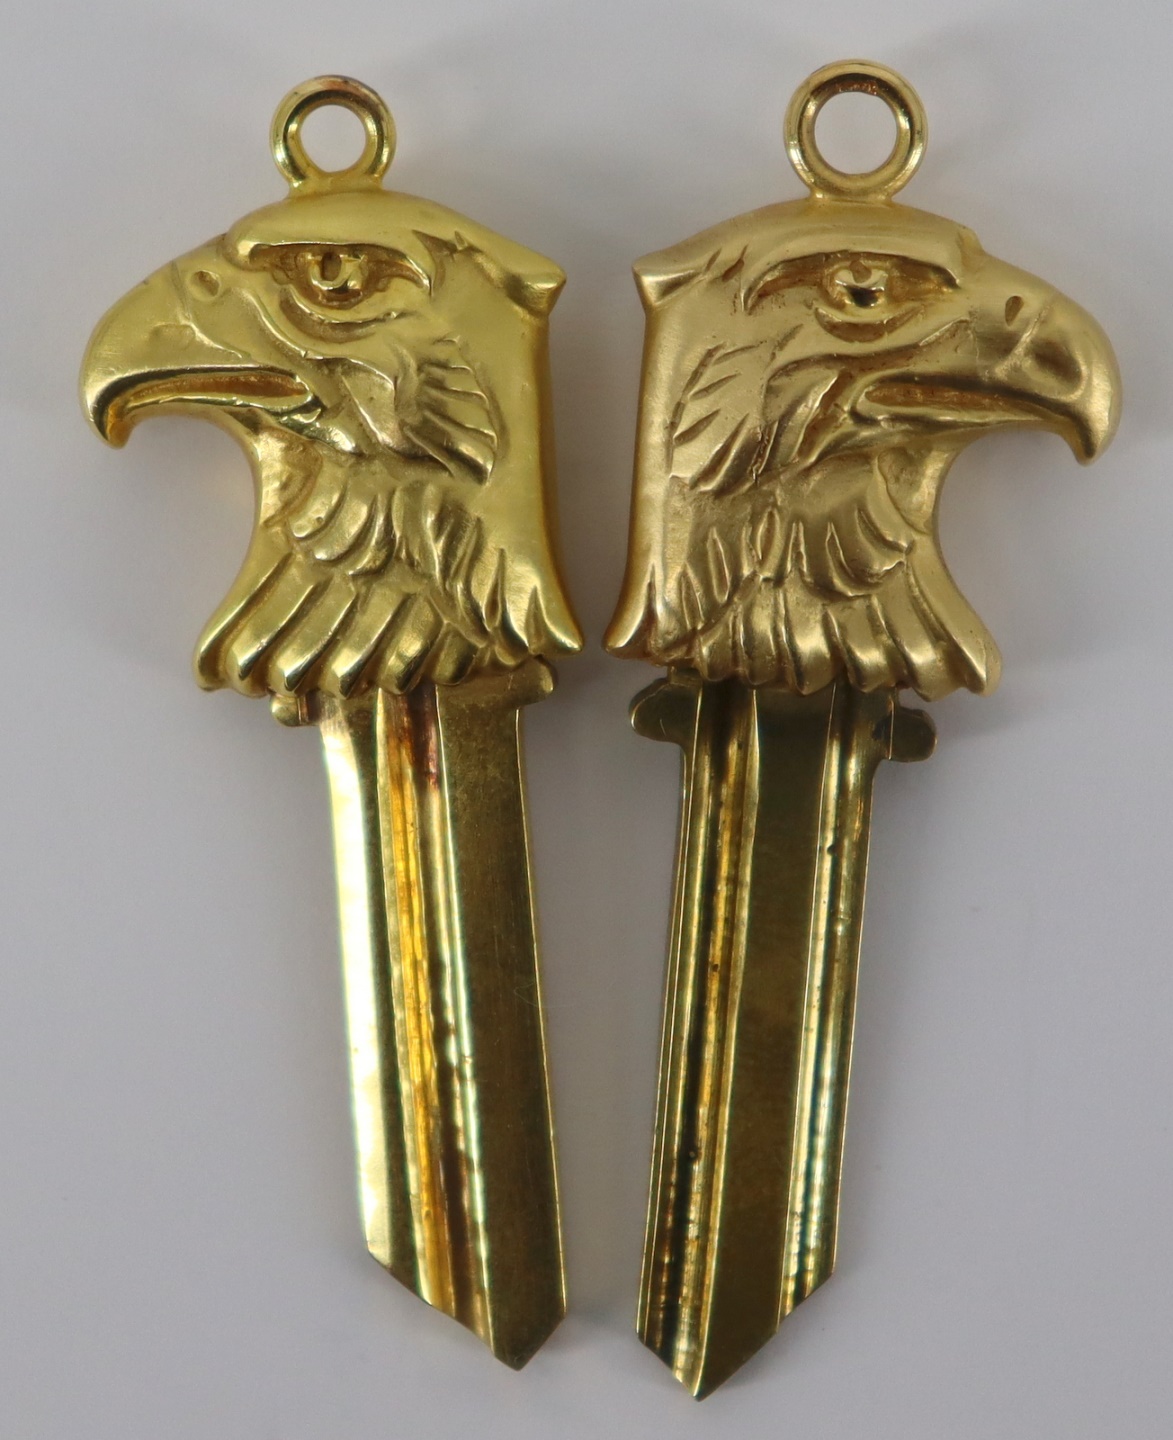 JEWELRY PAIR OF 14KT GOLD FIGURAL 3bc335